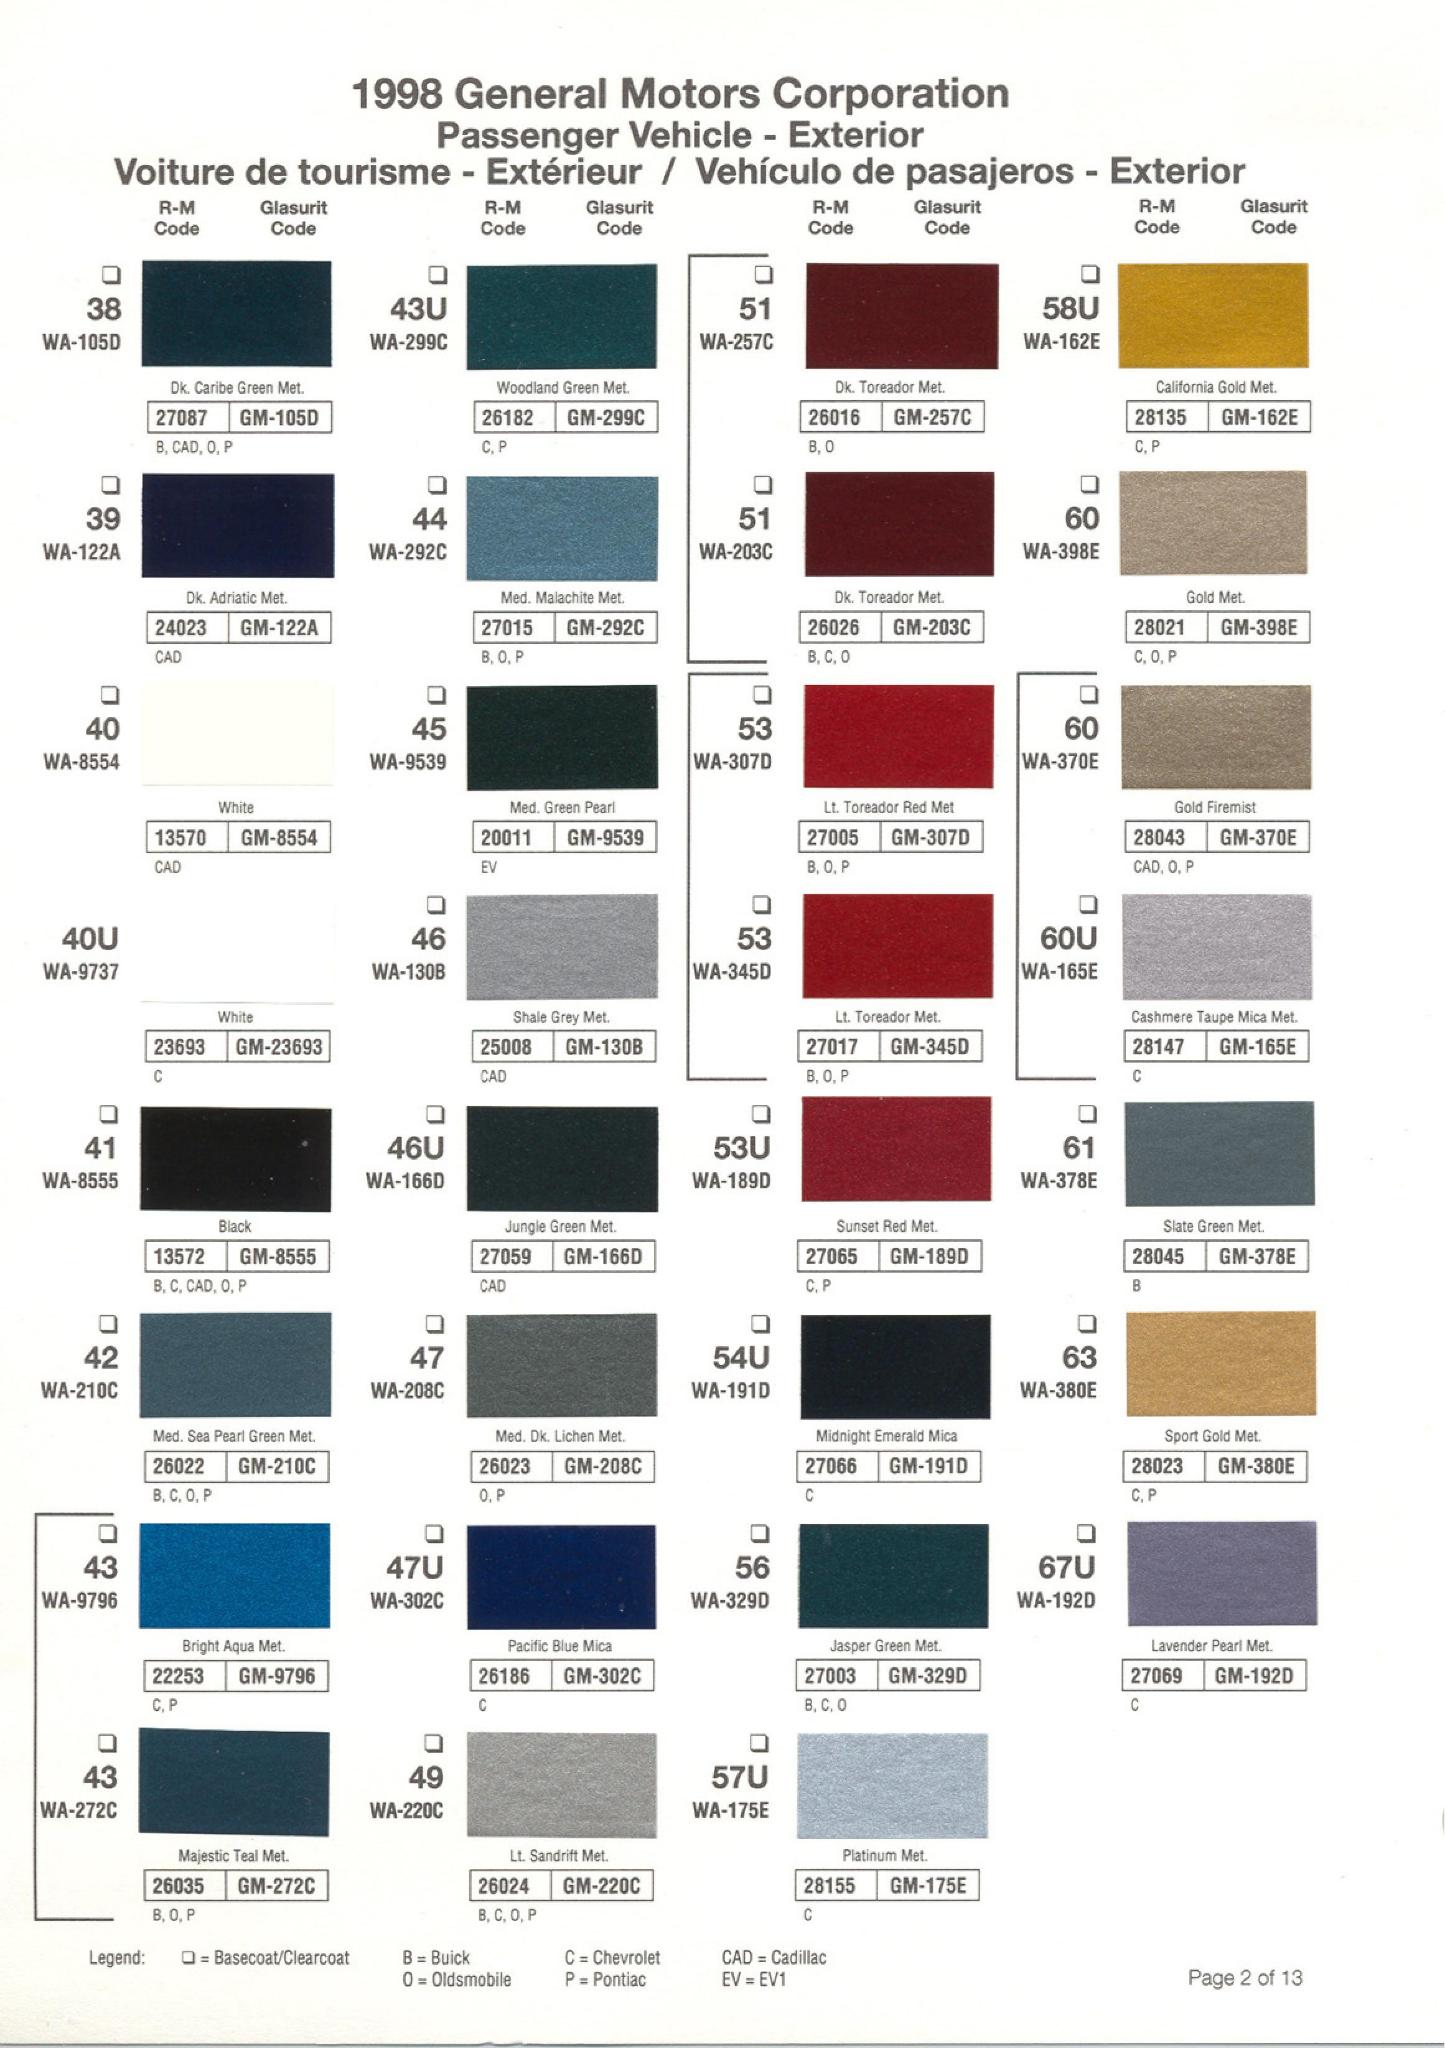 Paint Color Examaples used on GM Vehicles and thier unique paint codes